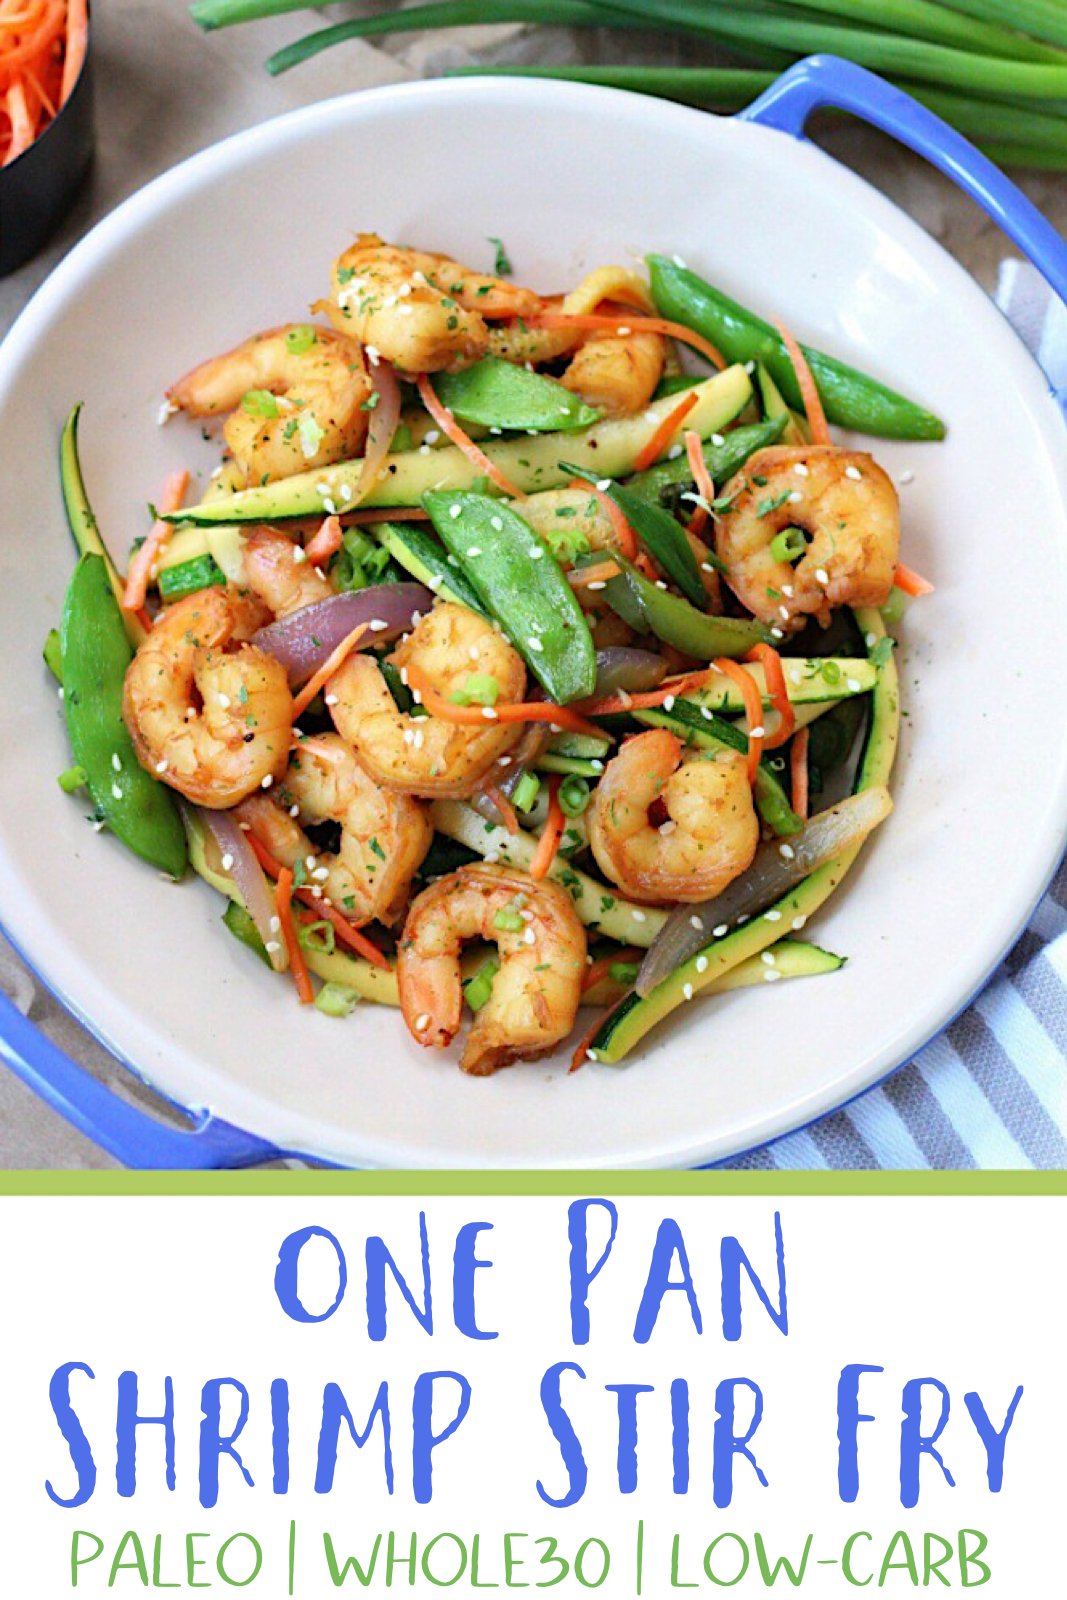 This easy shrimp stir fry recipe is a great Whole30 dinner! If you love stir fry, you'll love this low carb version! Using zucchini noodles lets you eat this flavorful paleo meal, without the carbs! Plus the best tips for cooking with gelatin are included! #paleostirfry #paleoshrimp #lowcarbstirfry #whole30recipes #whole30shrimp via @paleobailey